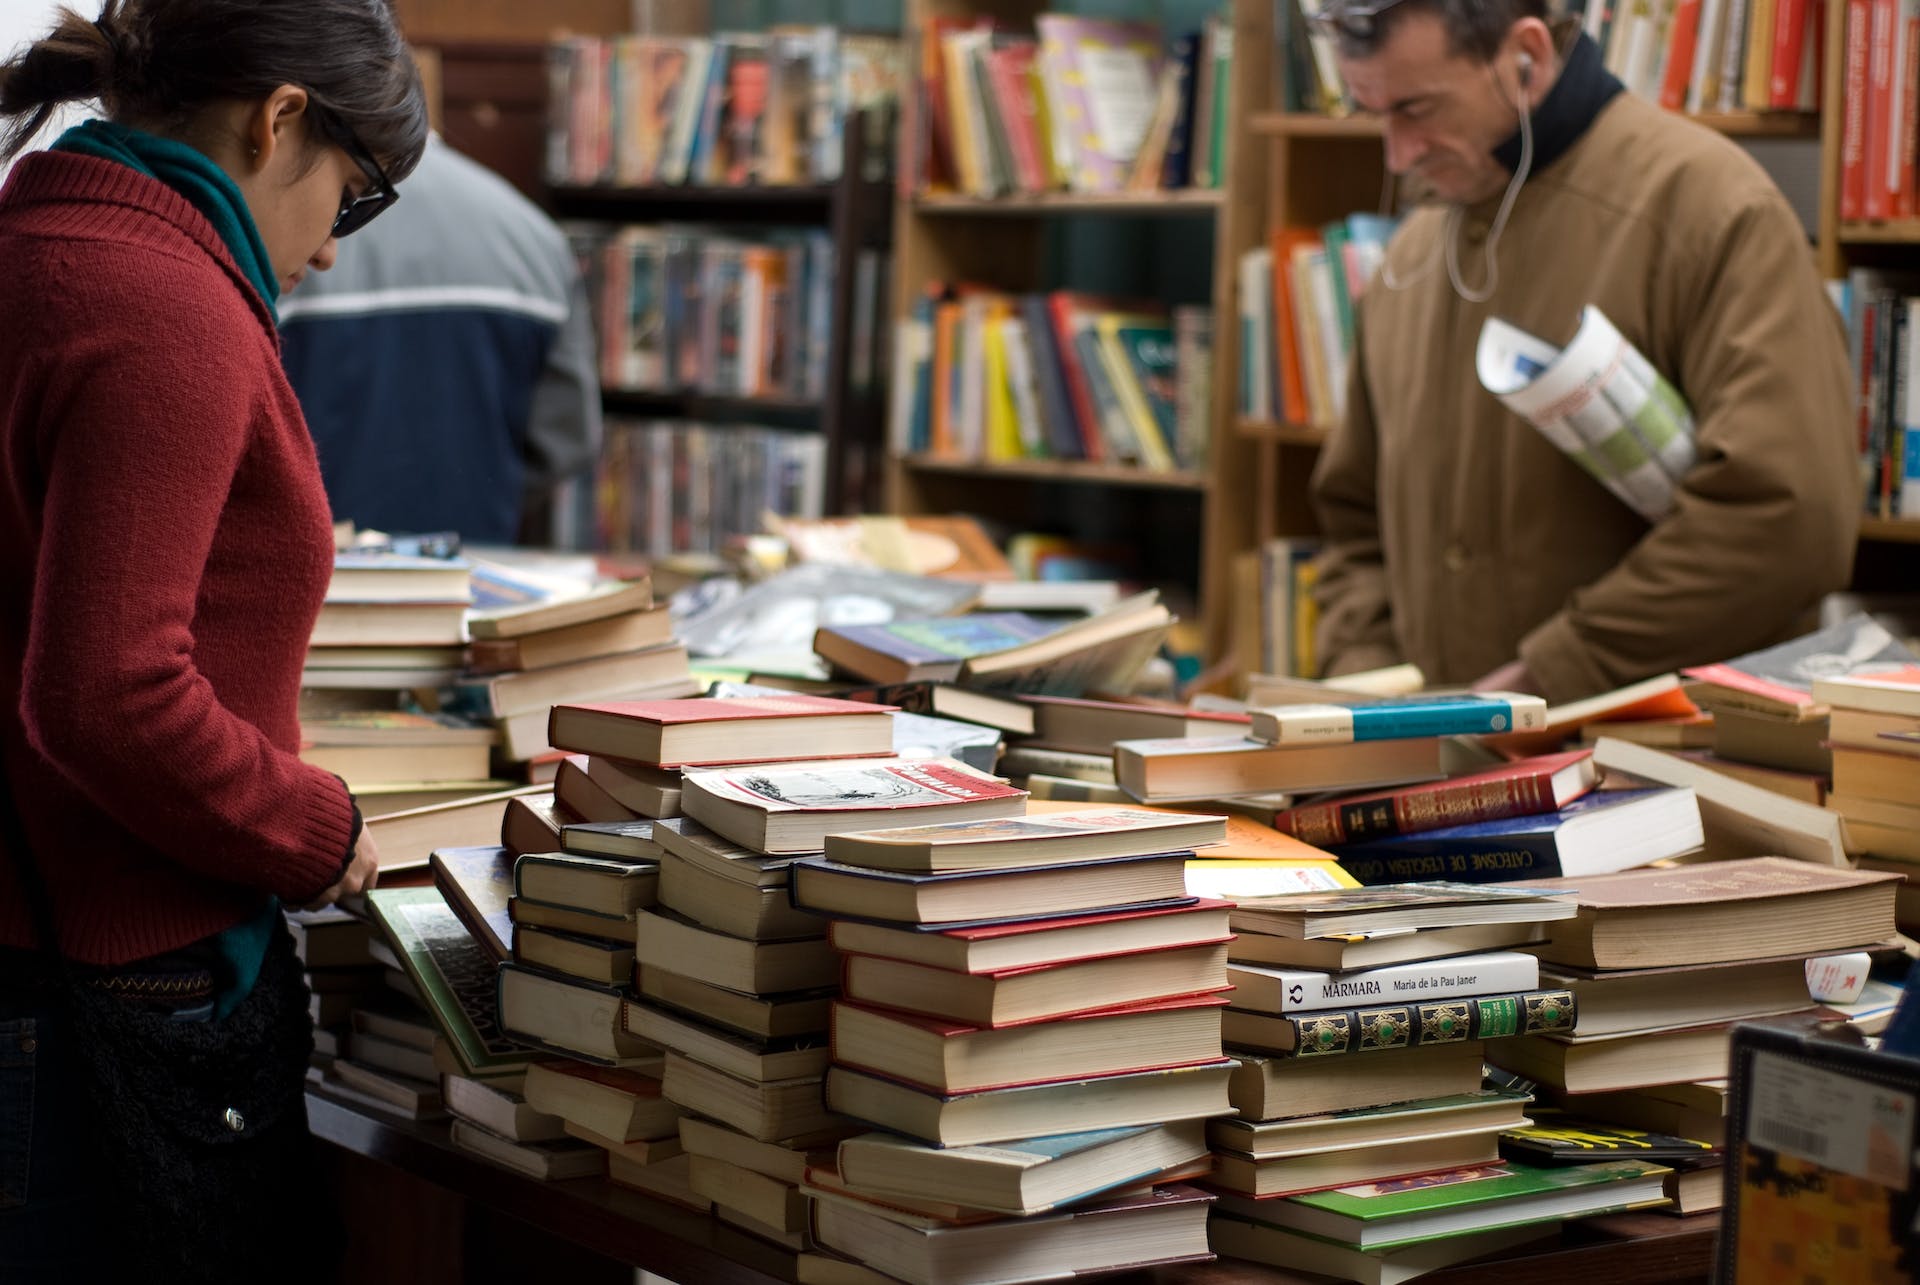 People in a bookstore | Source: Pexels